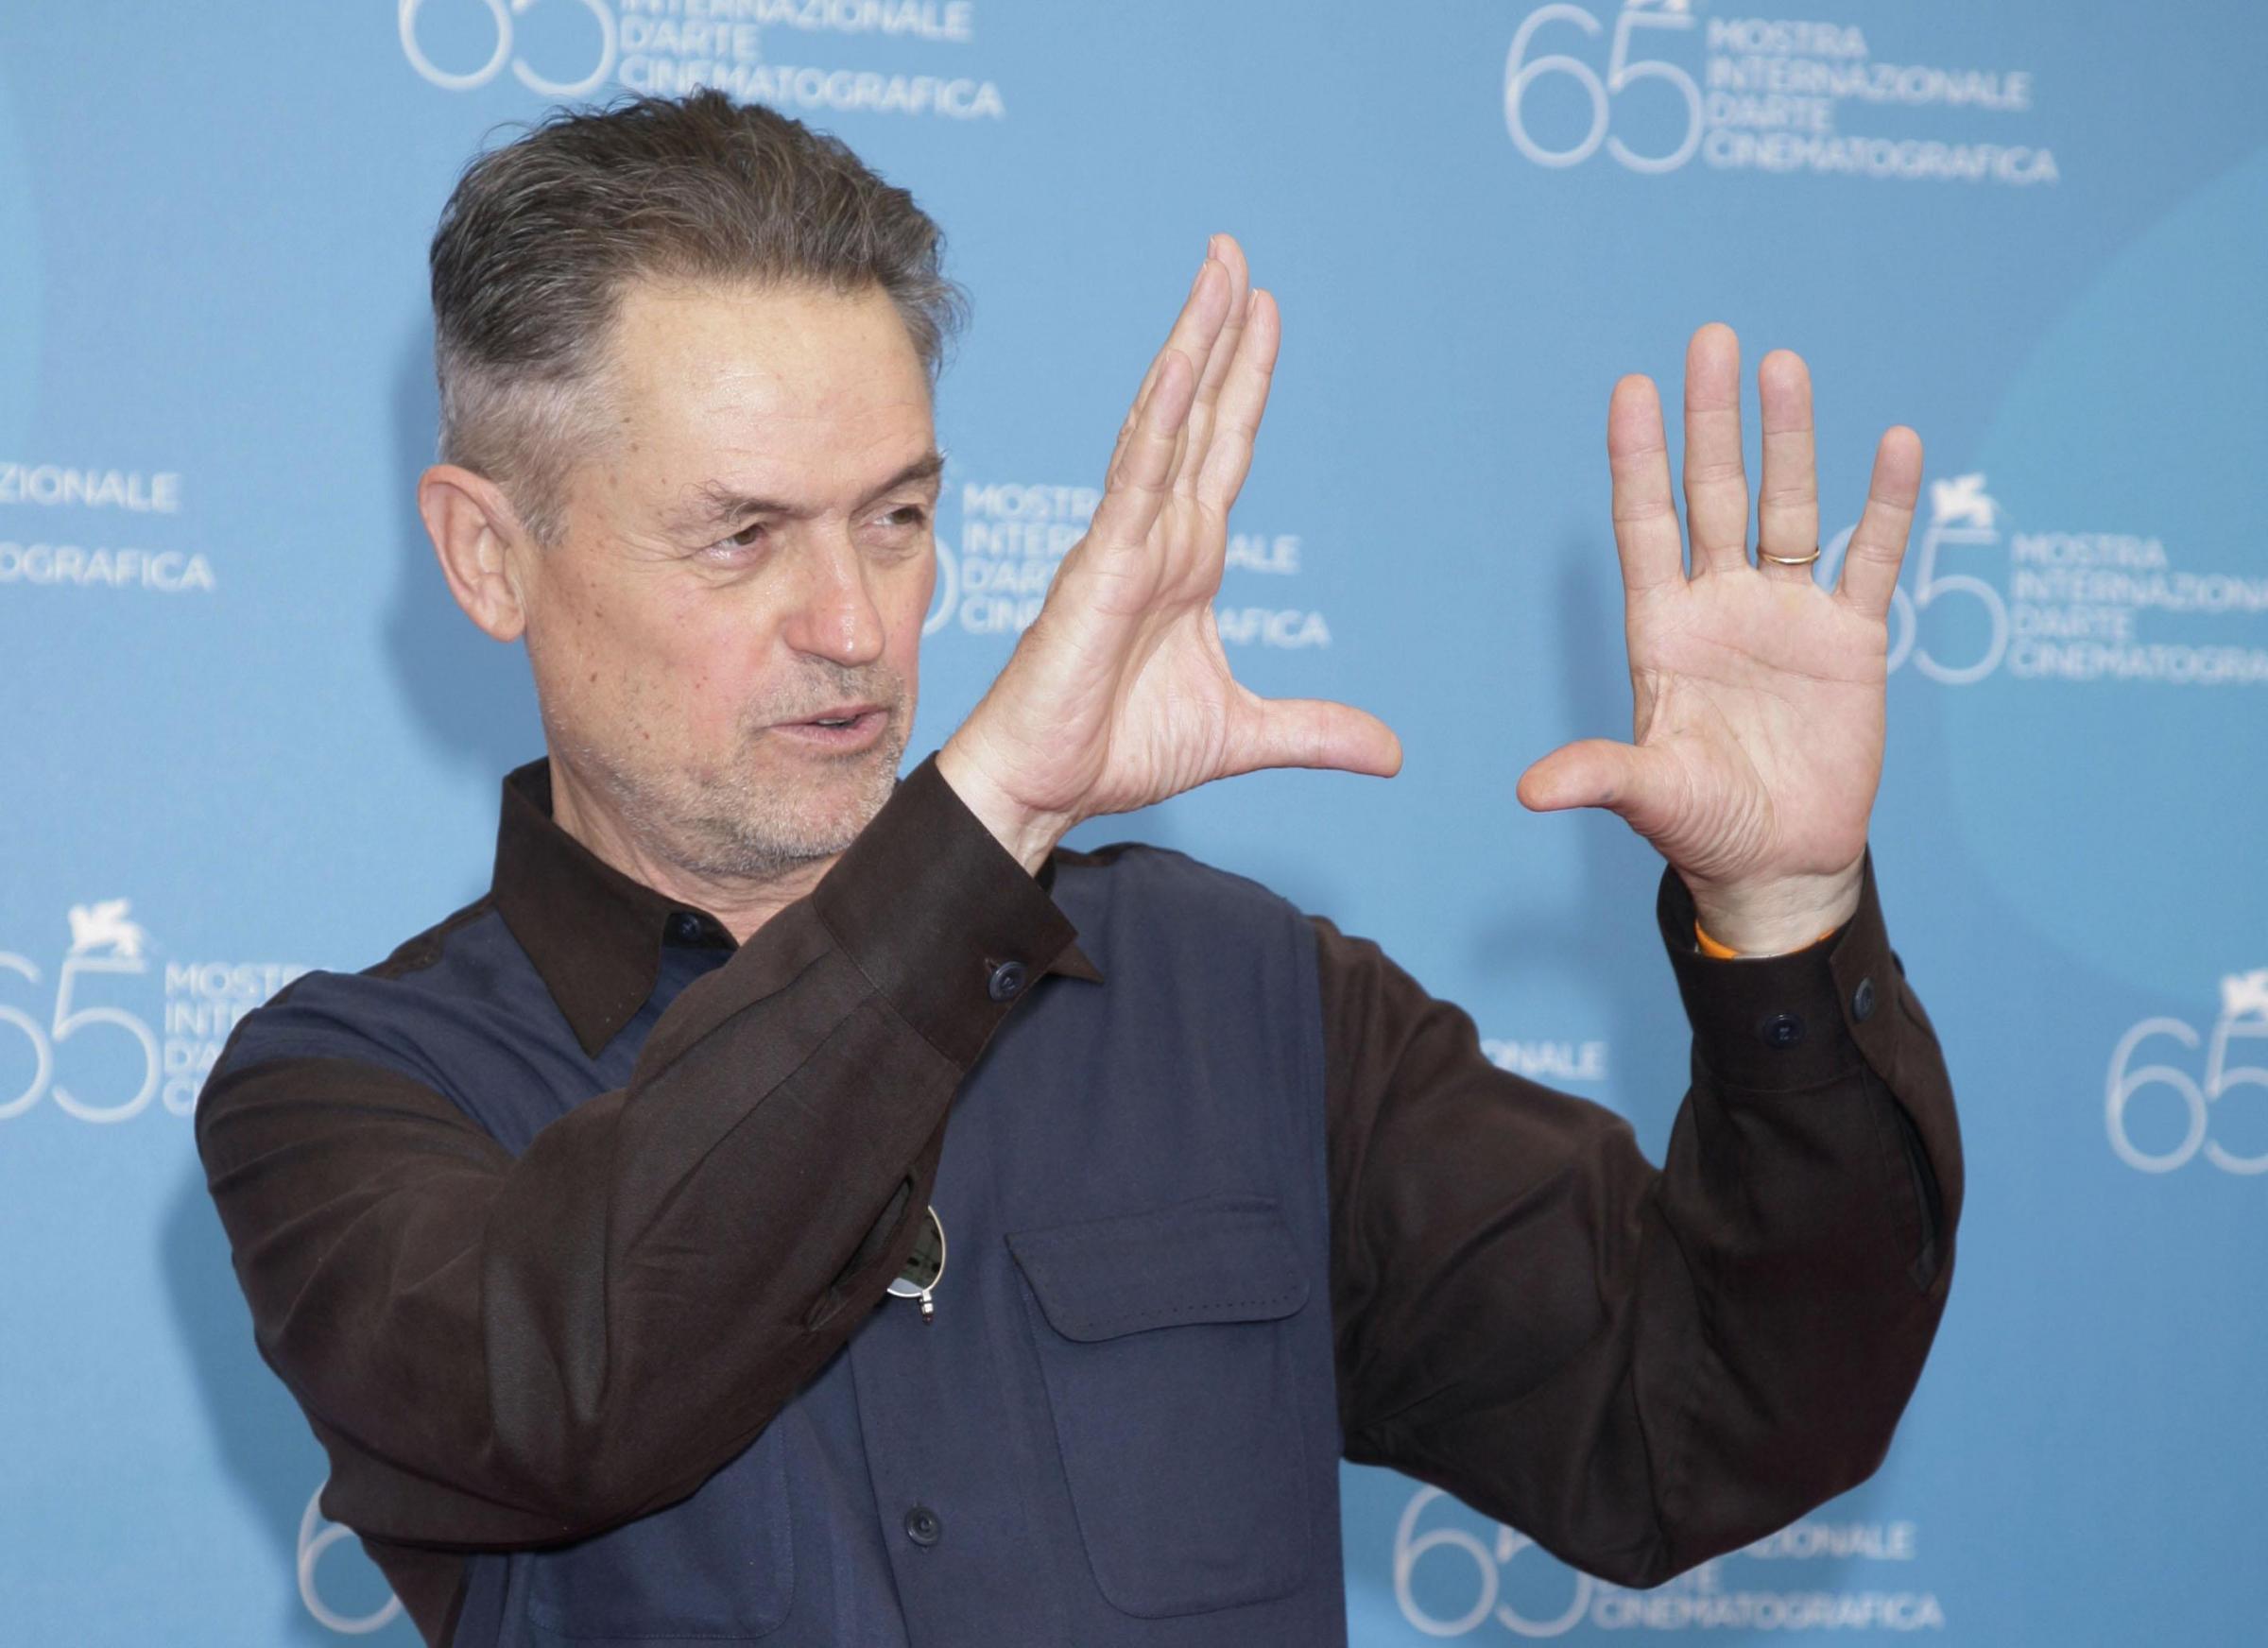 Silence Of The Lambs director Jonathan Demme dies aged 73 - Bury Times